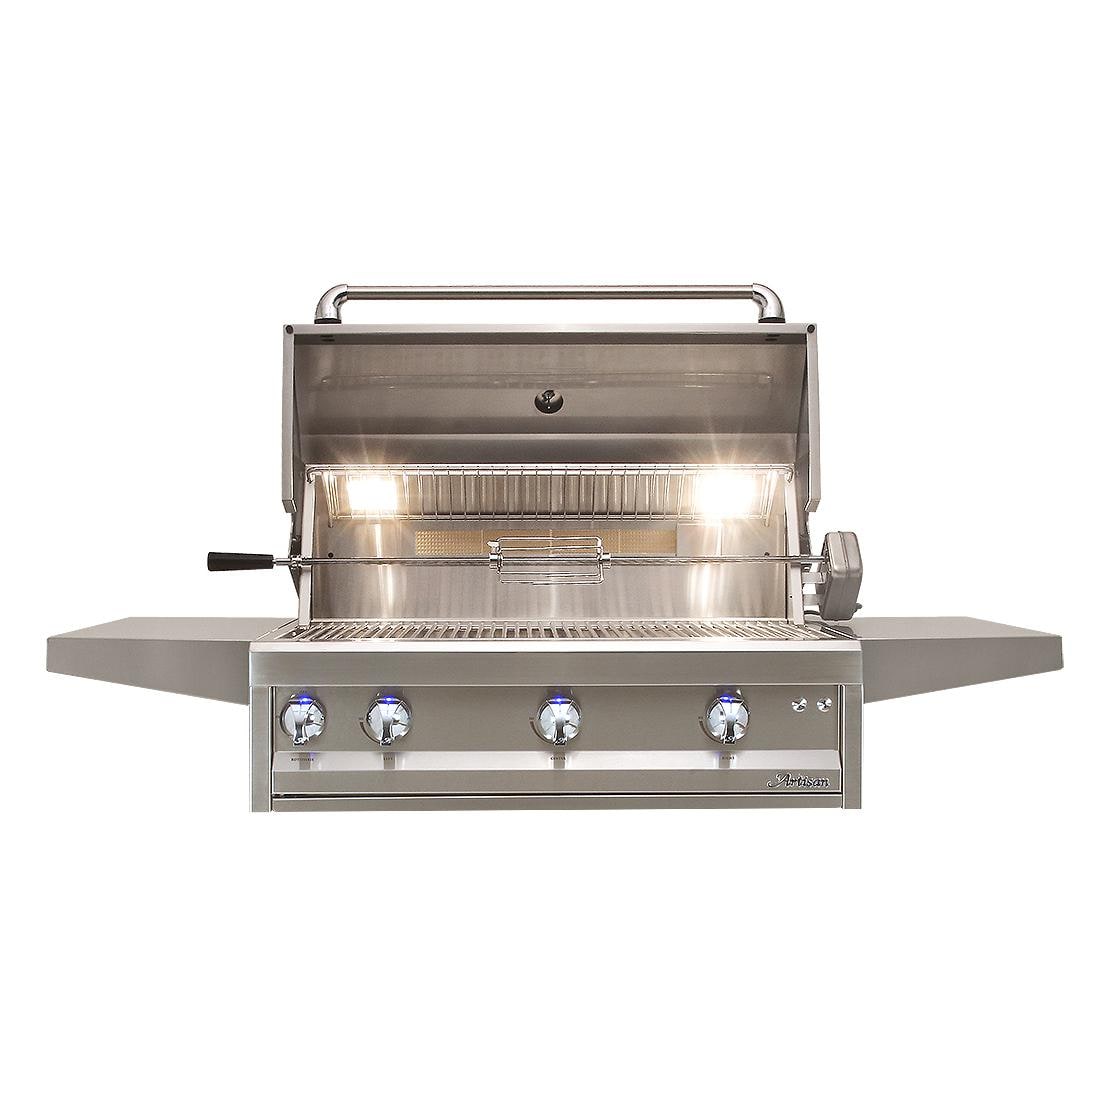 Artisan Professional 36-Inch 3-Burner Built-In Natural Gas Grill With Rotisserie - ARTP-36-NG - image 2 of 6